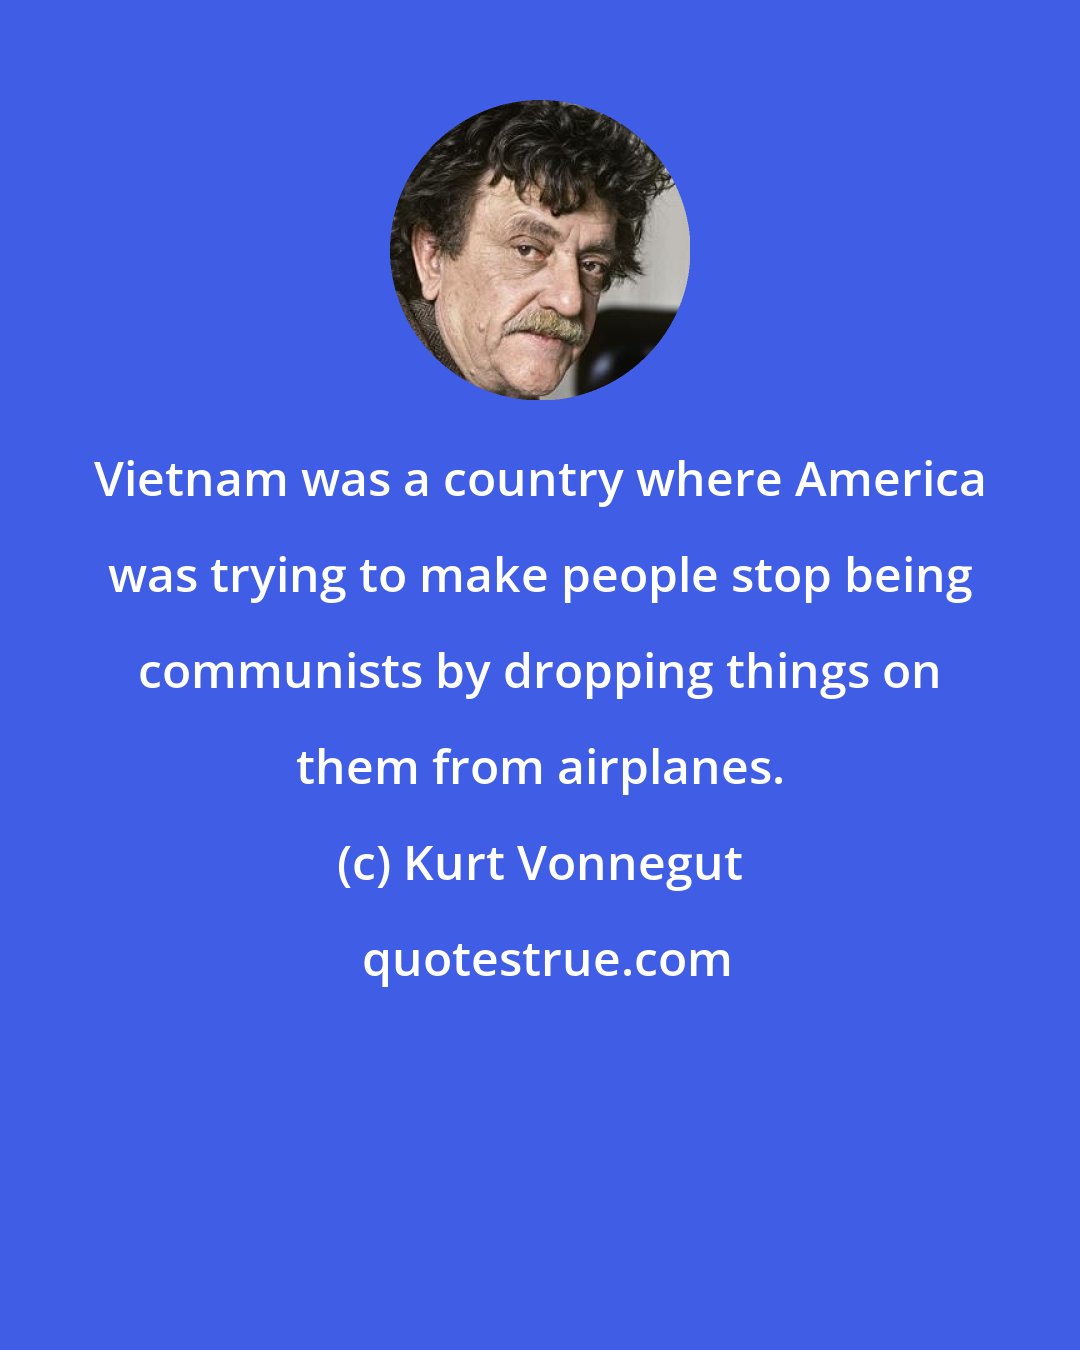 Kurt Vonnegut: Vietnam was a country where America was trying to make people stop being communists by dropping things on them from airplanes.